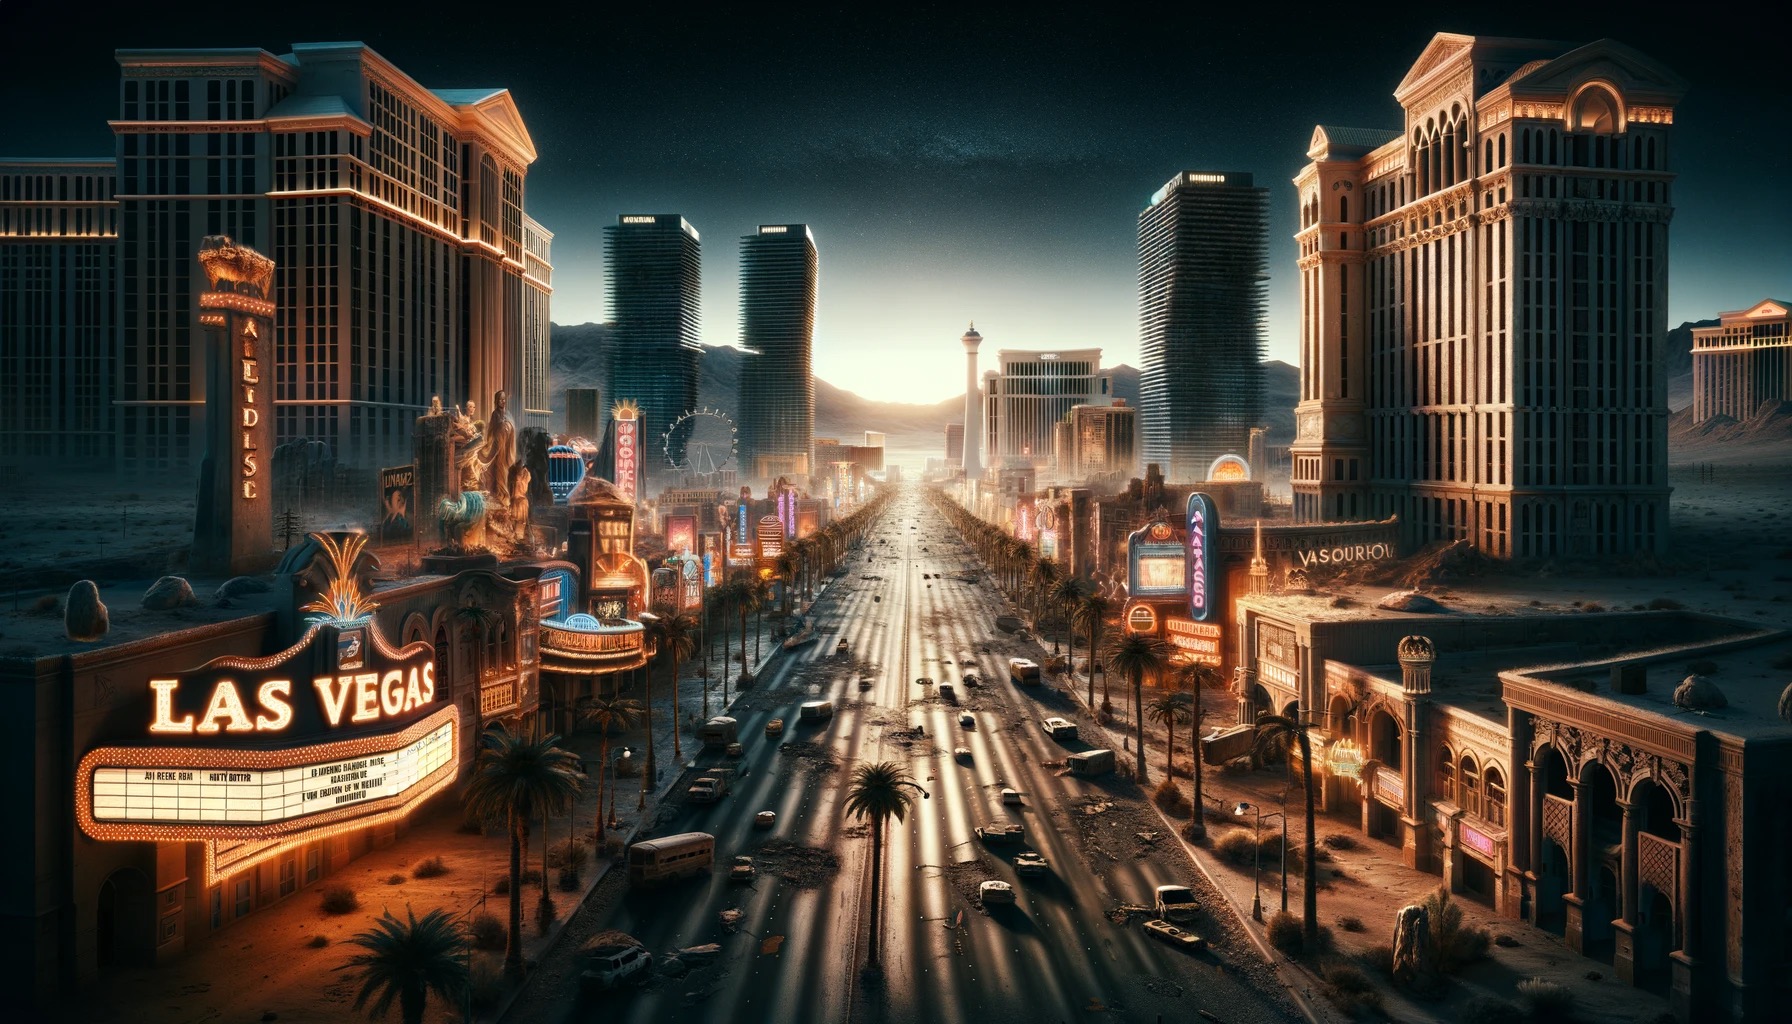 Las Vegas 100 years from now